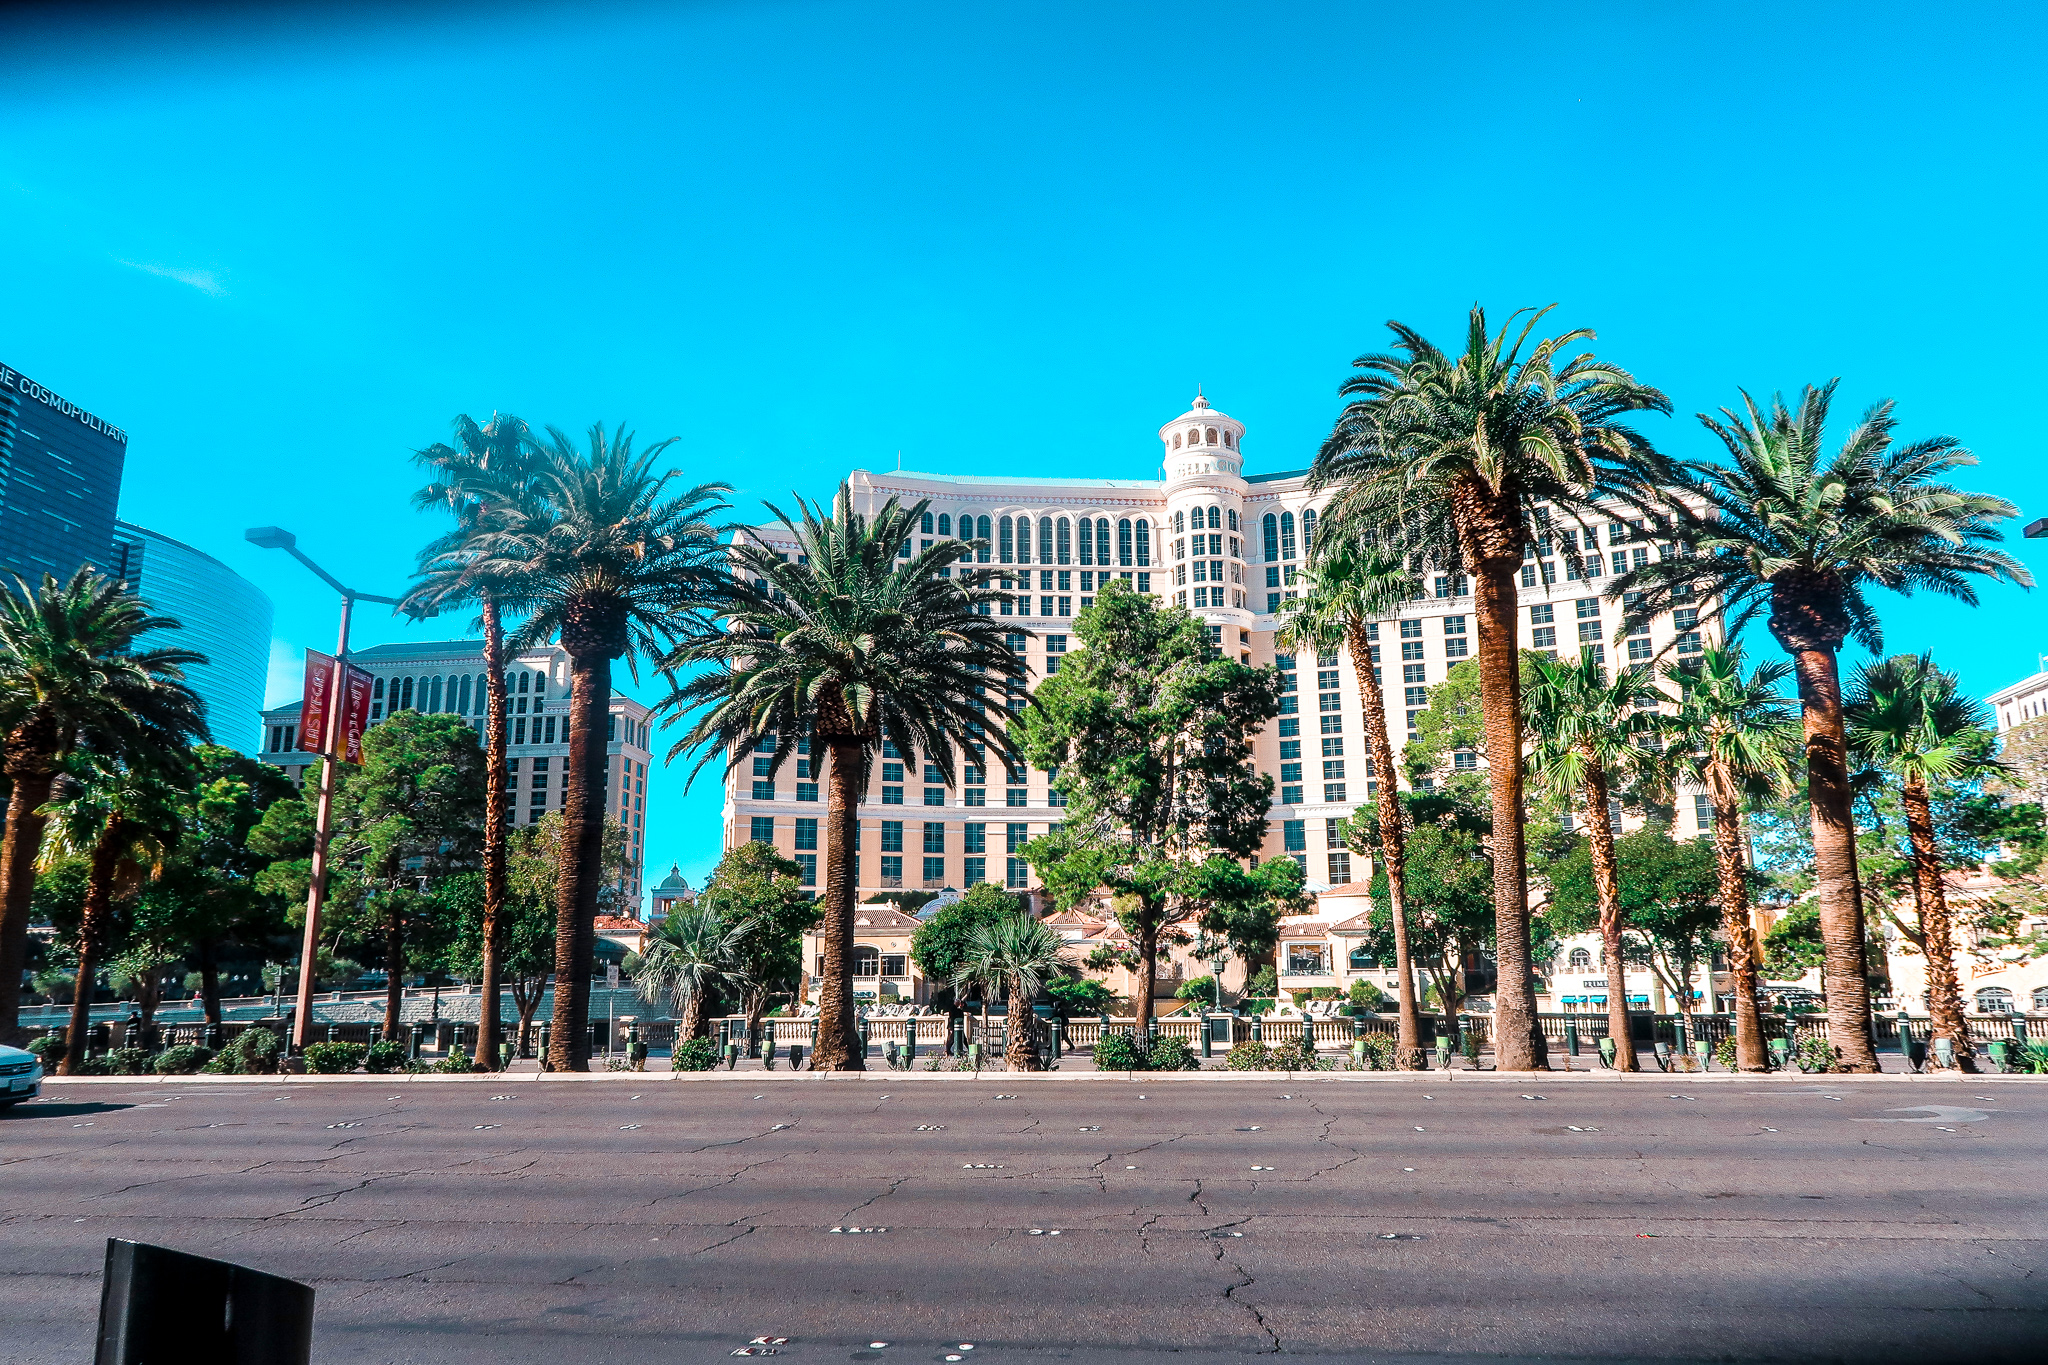 Bellagio | 7 Night Itinerary for Las Vegas | If you're looking to plan things to do in Vegas here's what we got up to on our 6th visit | Travel Tips | Elle Blonde Luxury Lifestyle Destination Blog